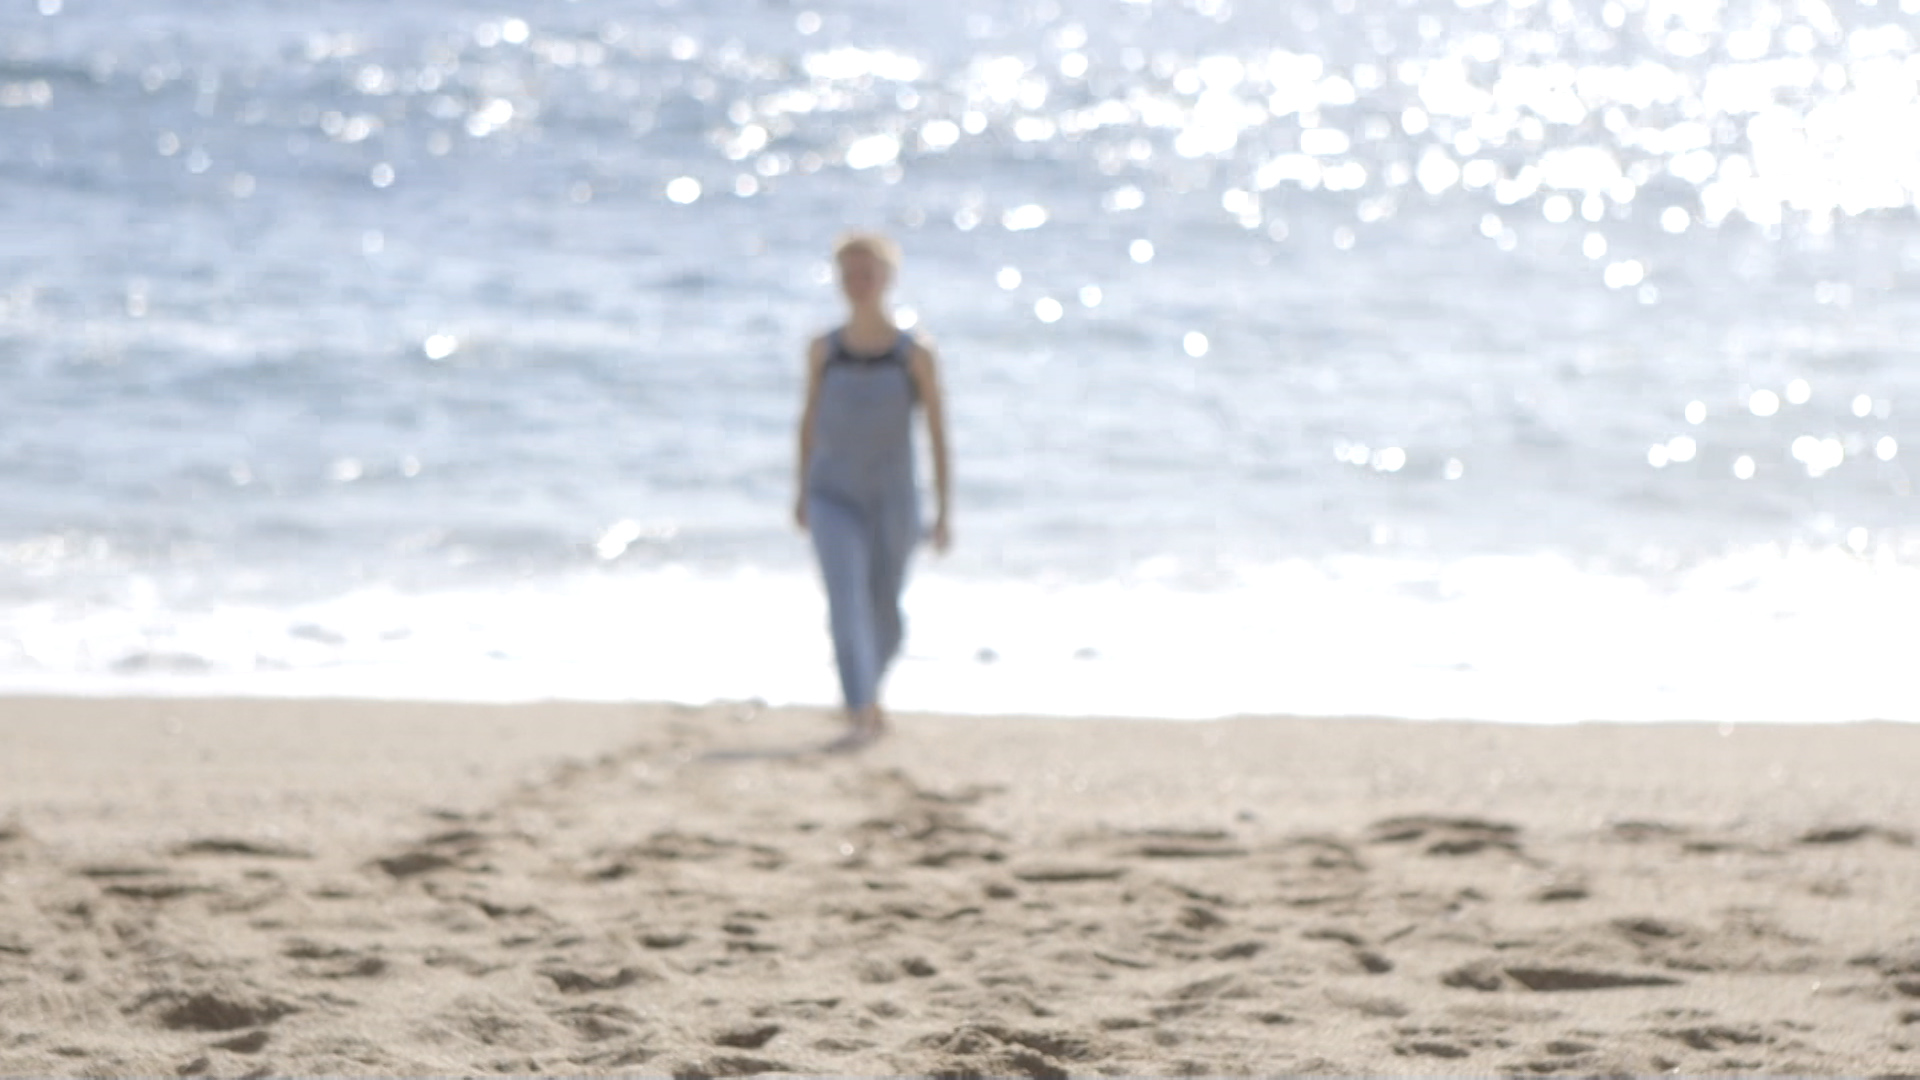 Blurred image of person in dungarees walking on beach, as if emerging from the sea.